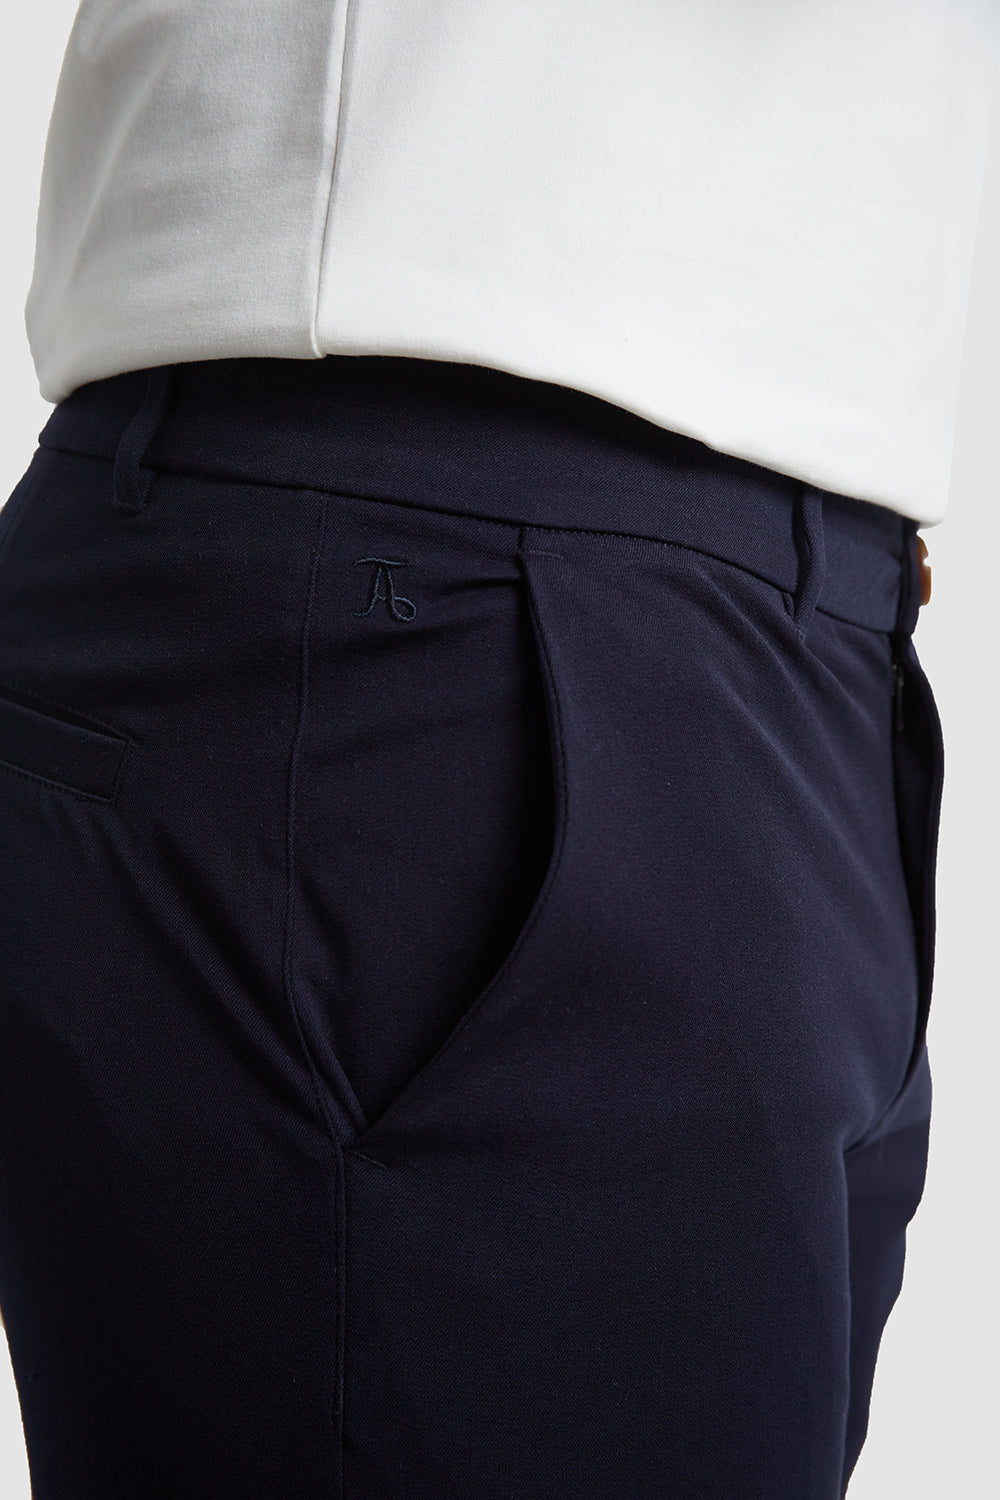 Fit - ATHLETE TAILORED Athletic in - Chino USA Shorts Navy